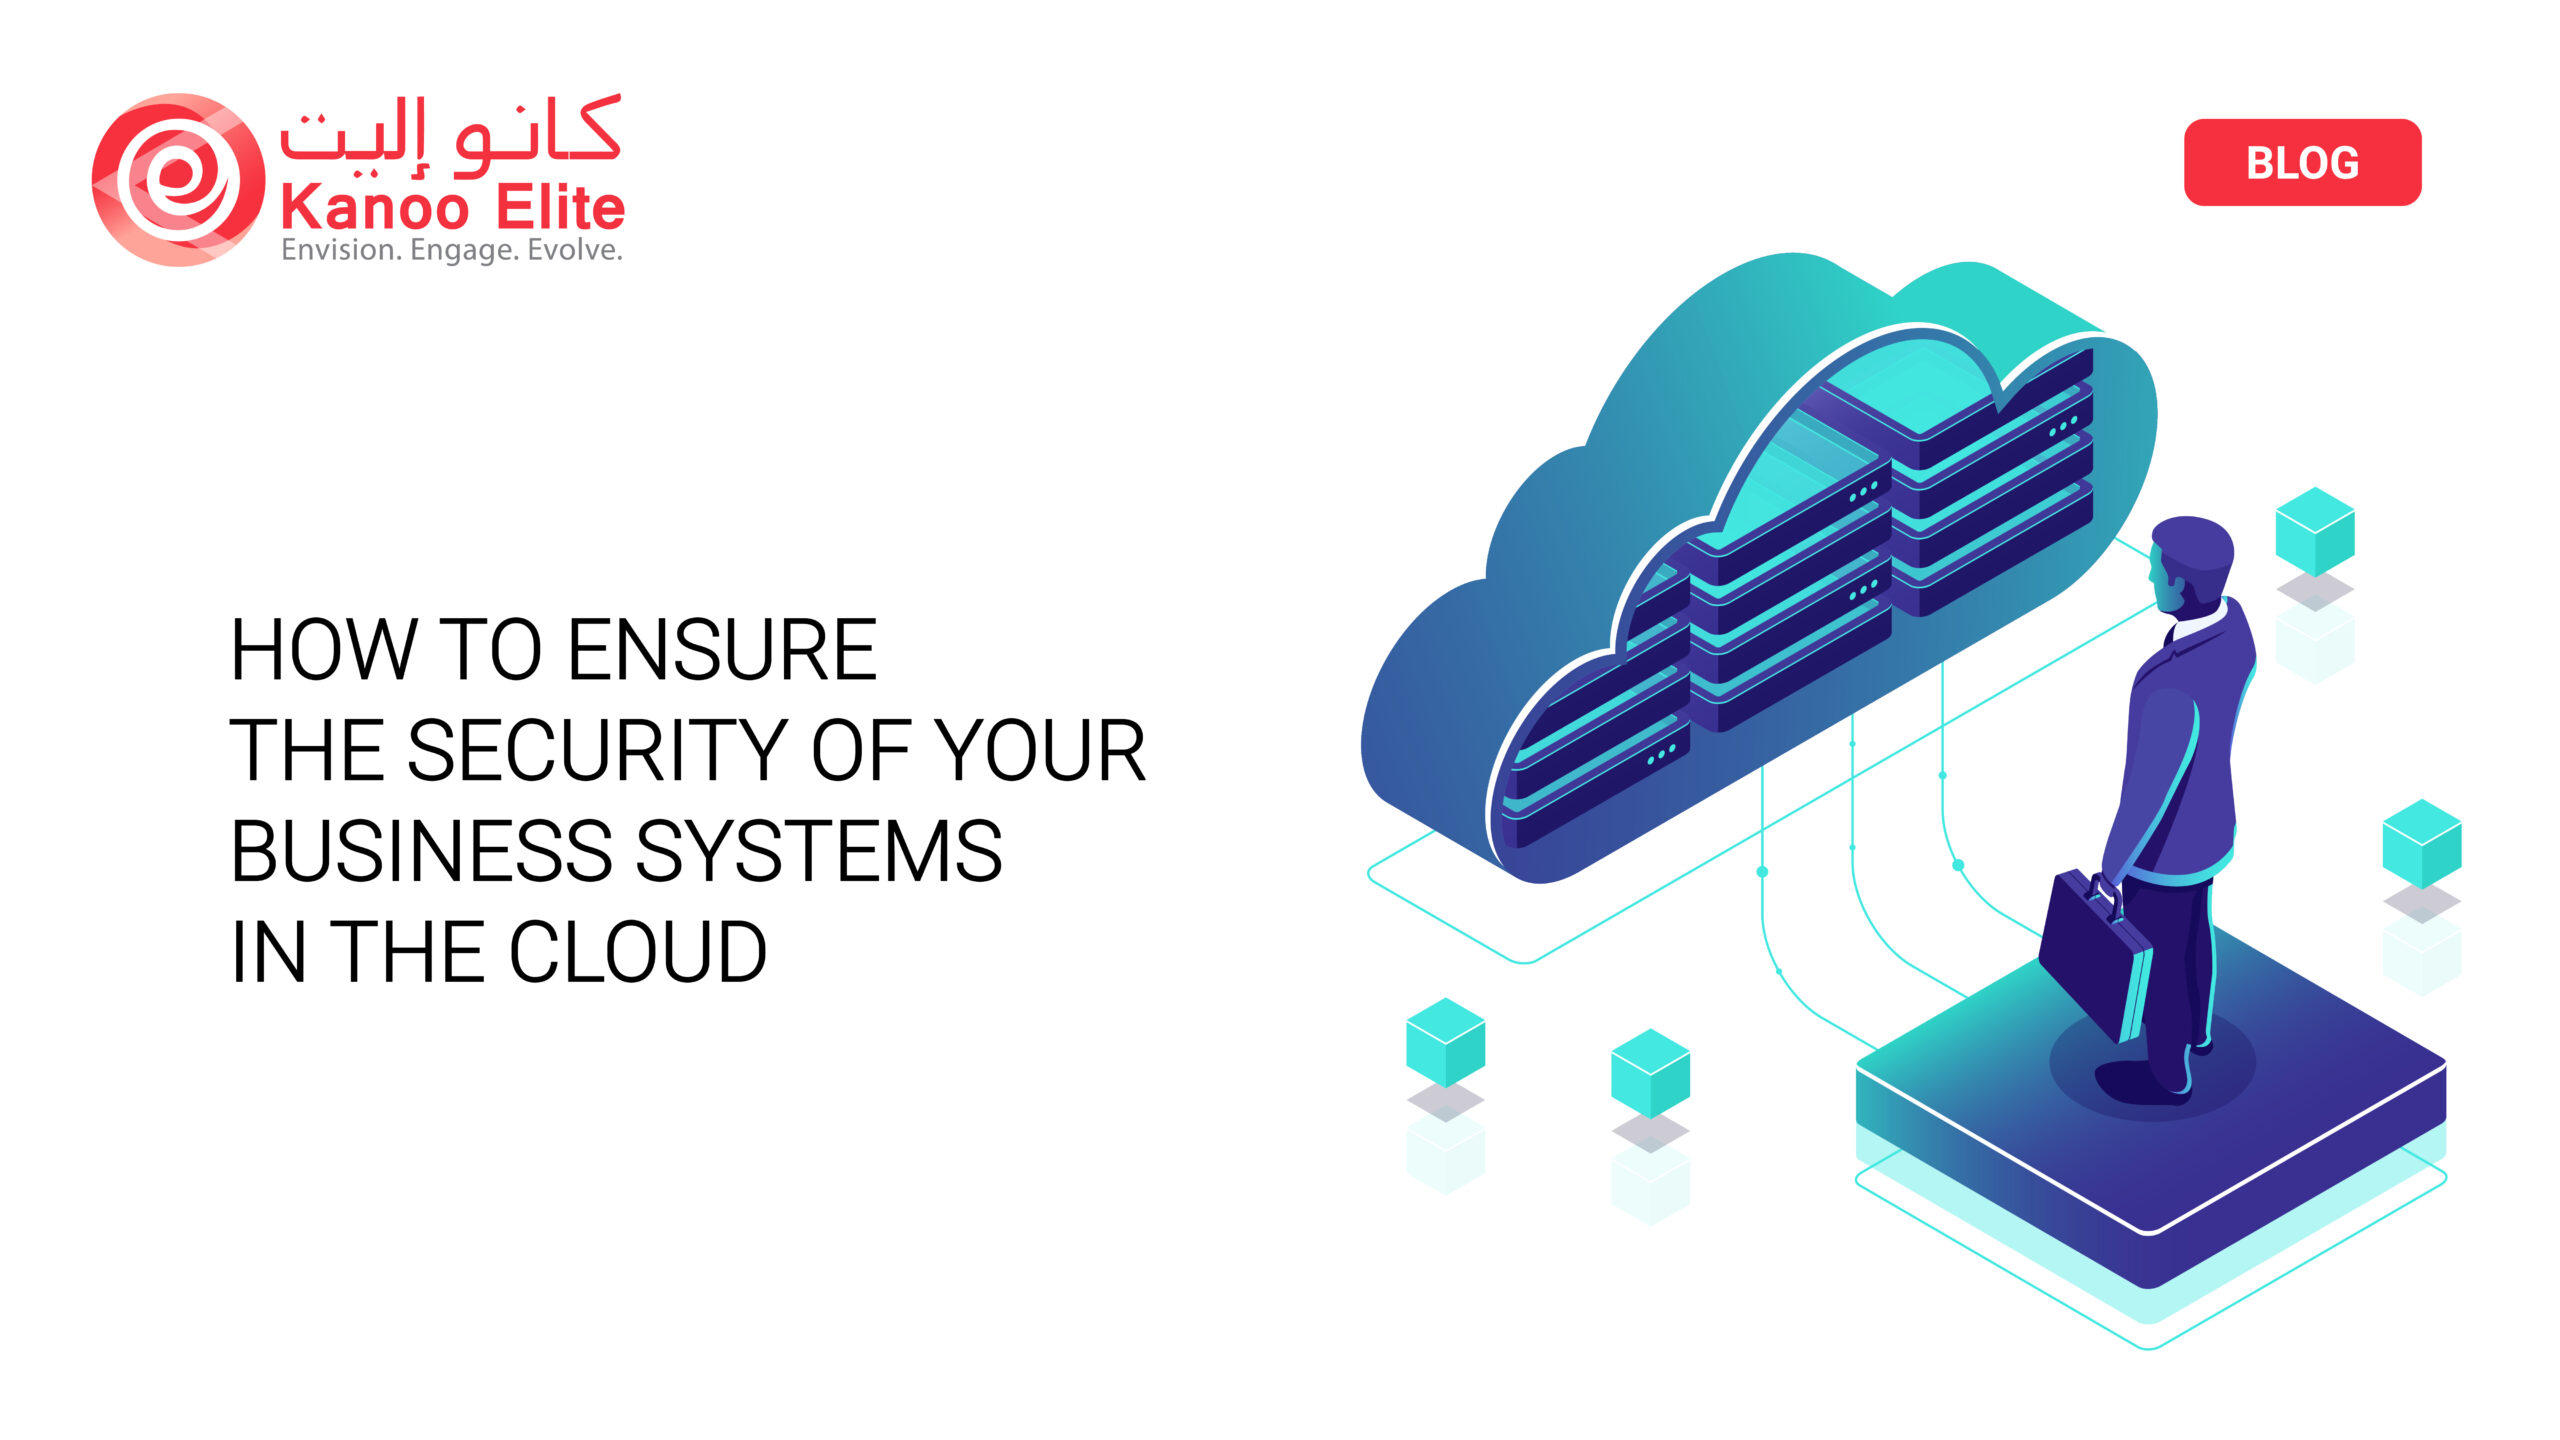 How to Ensure the Security of Your Business Systems in the Cloud